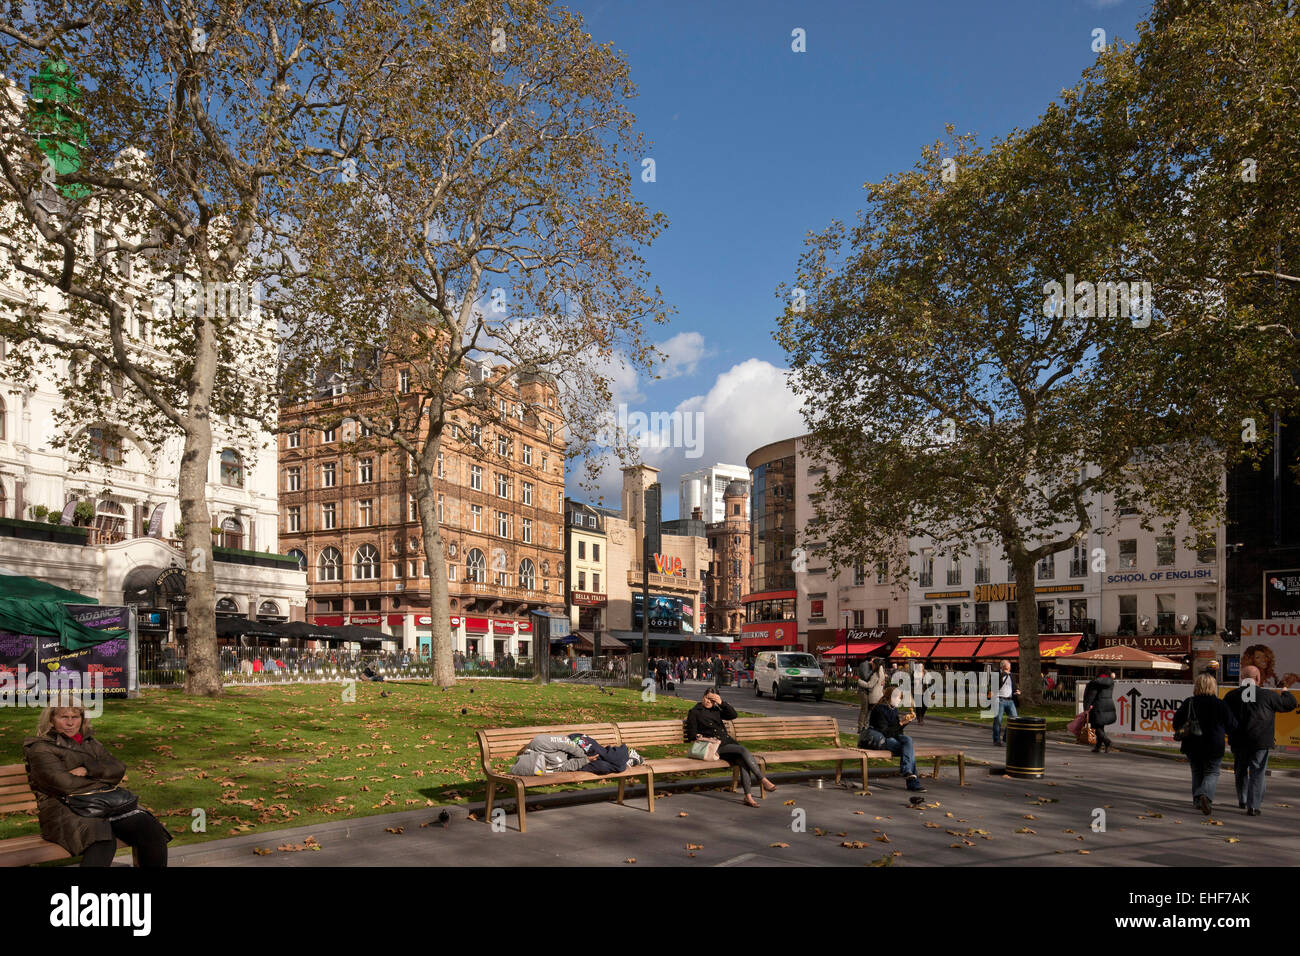 People in a square in London Stock Photo